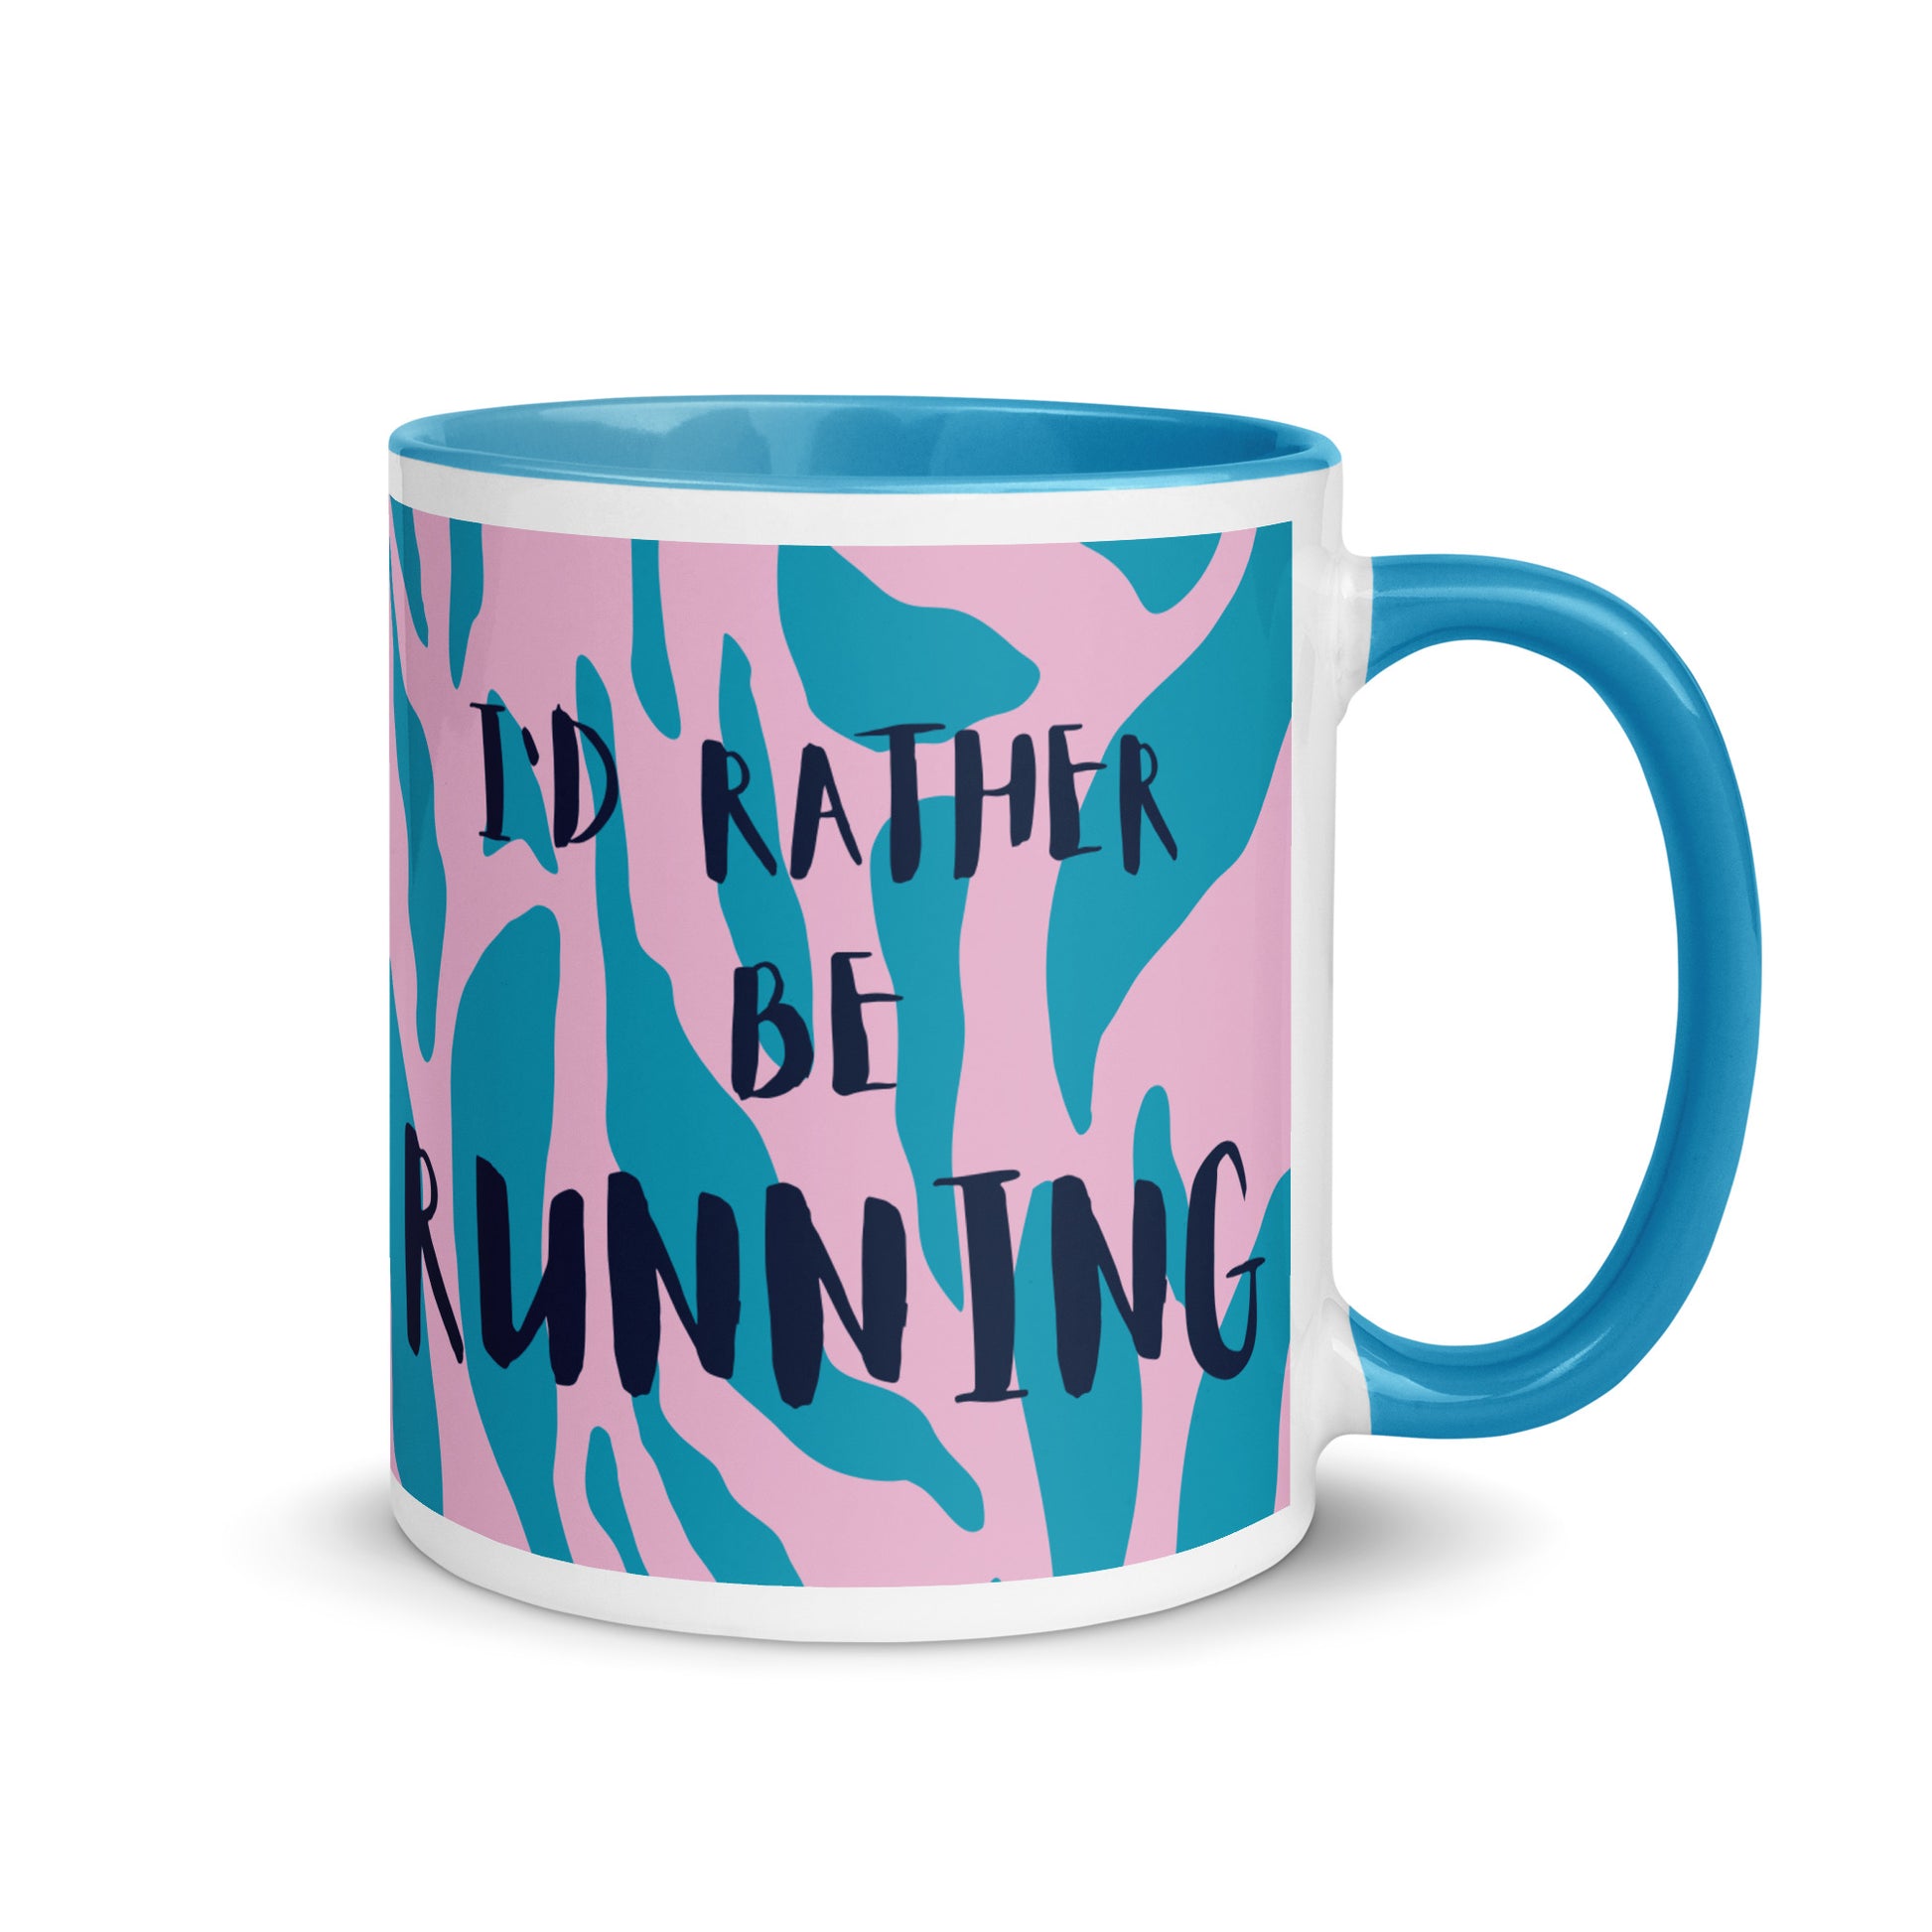 blue handled mug with a pink and blue animal print design and the phrase I'd rather be running in a black font. the perfect gift for a runner